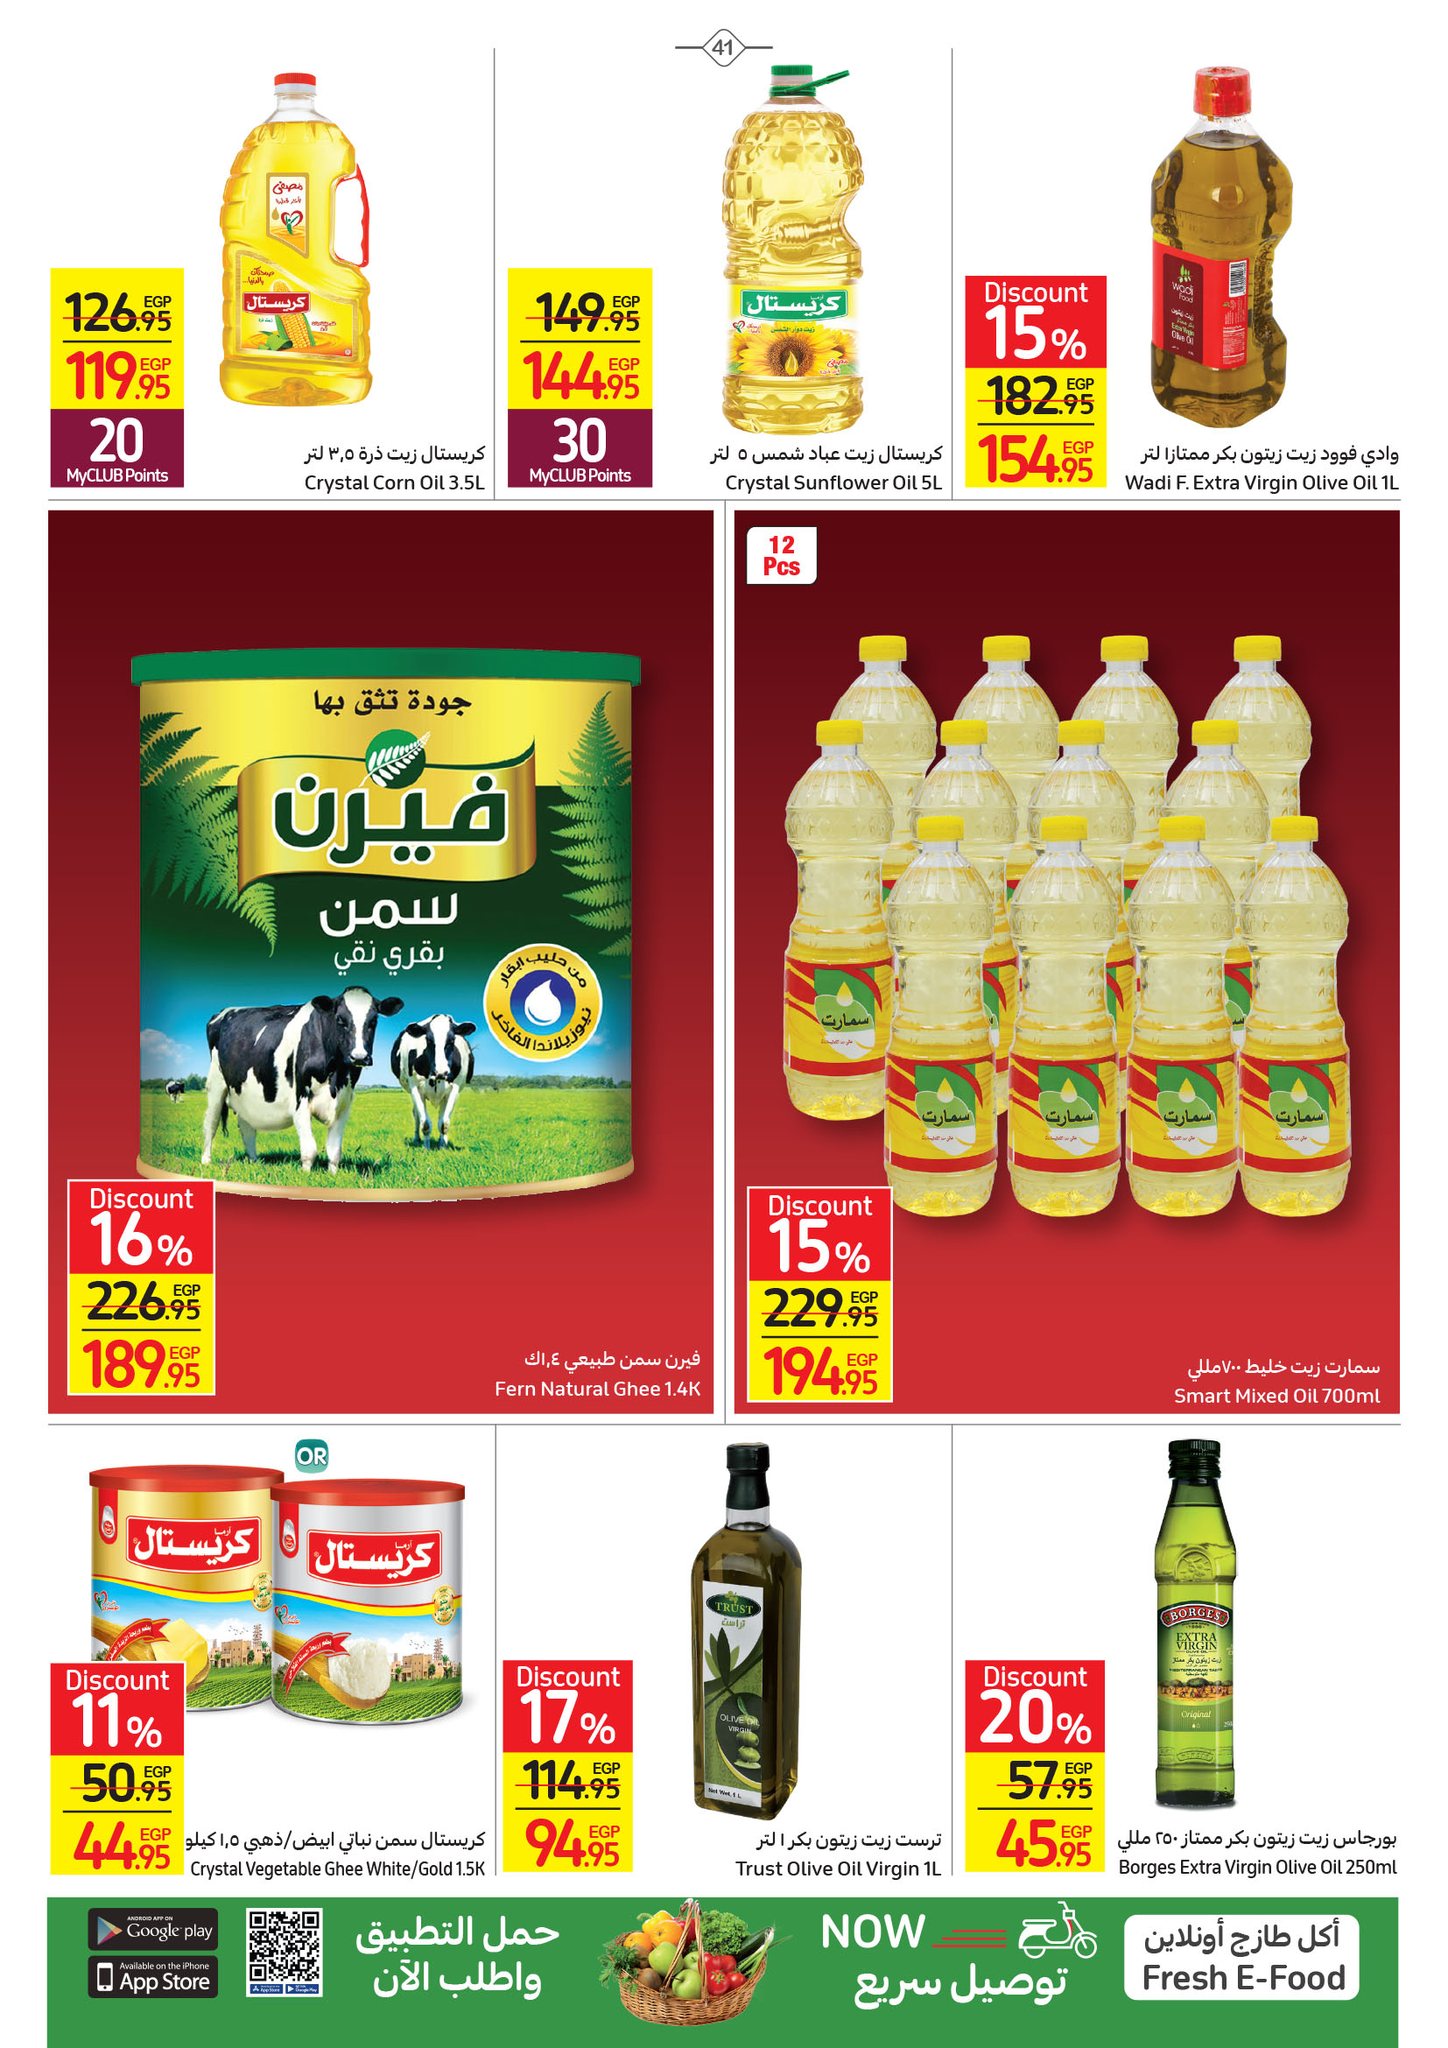 Watch the latest Carrefour half price offers "Last Chance Offer" until December 4 41